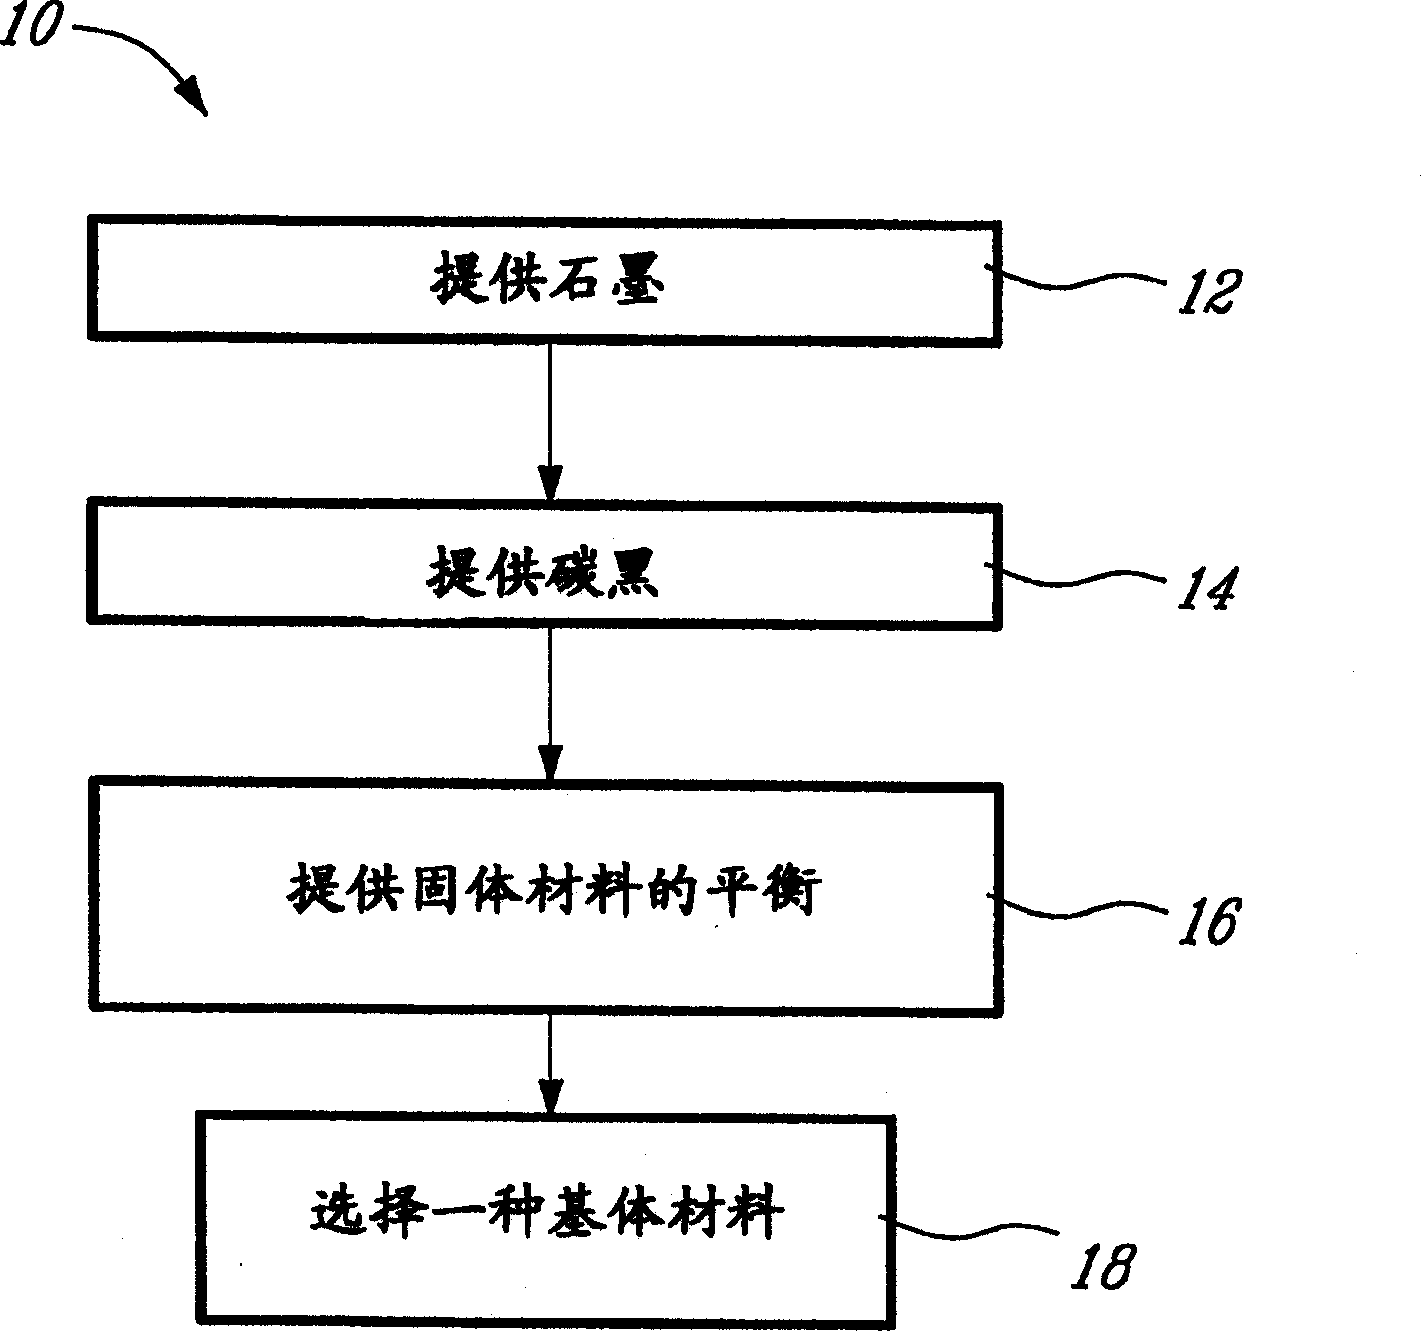 Electric discharge machining electrode and method